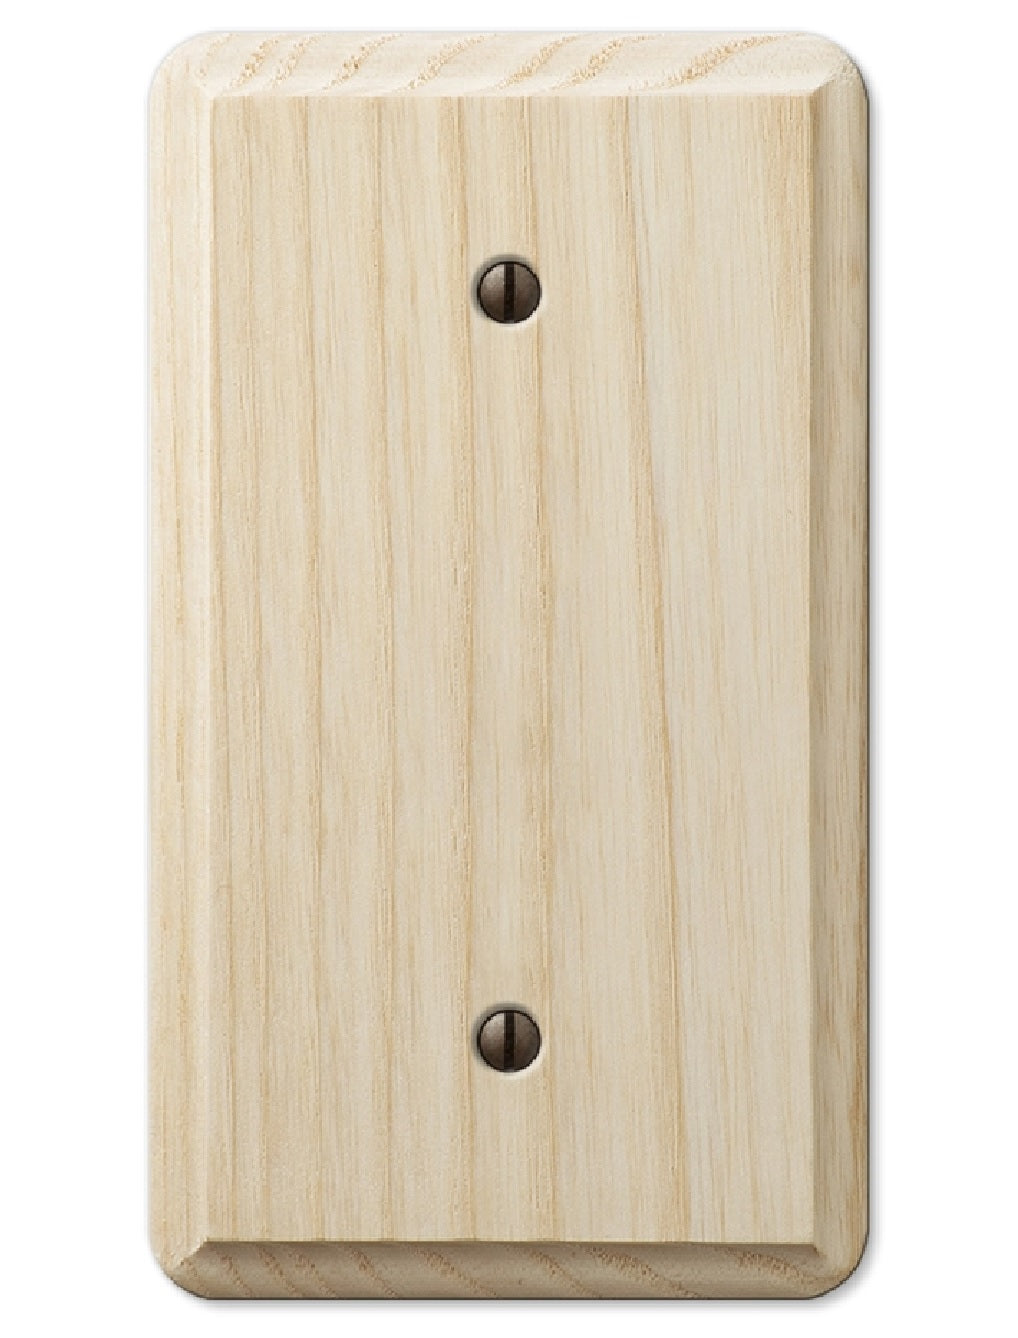 Amerelle 401B Wood Blank Wall Plate, Unfinished